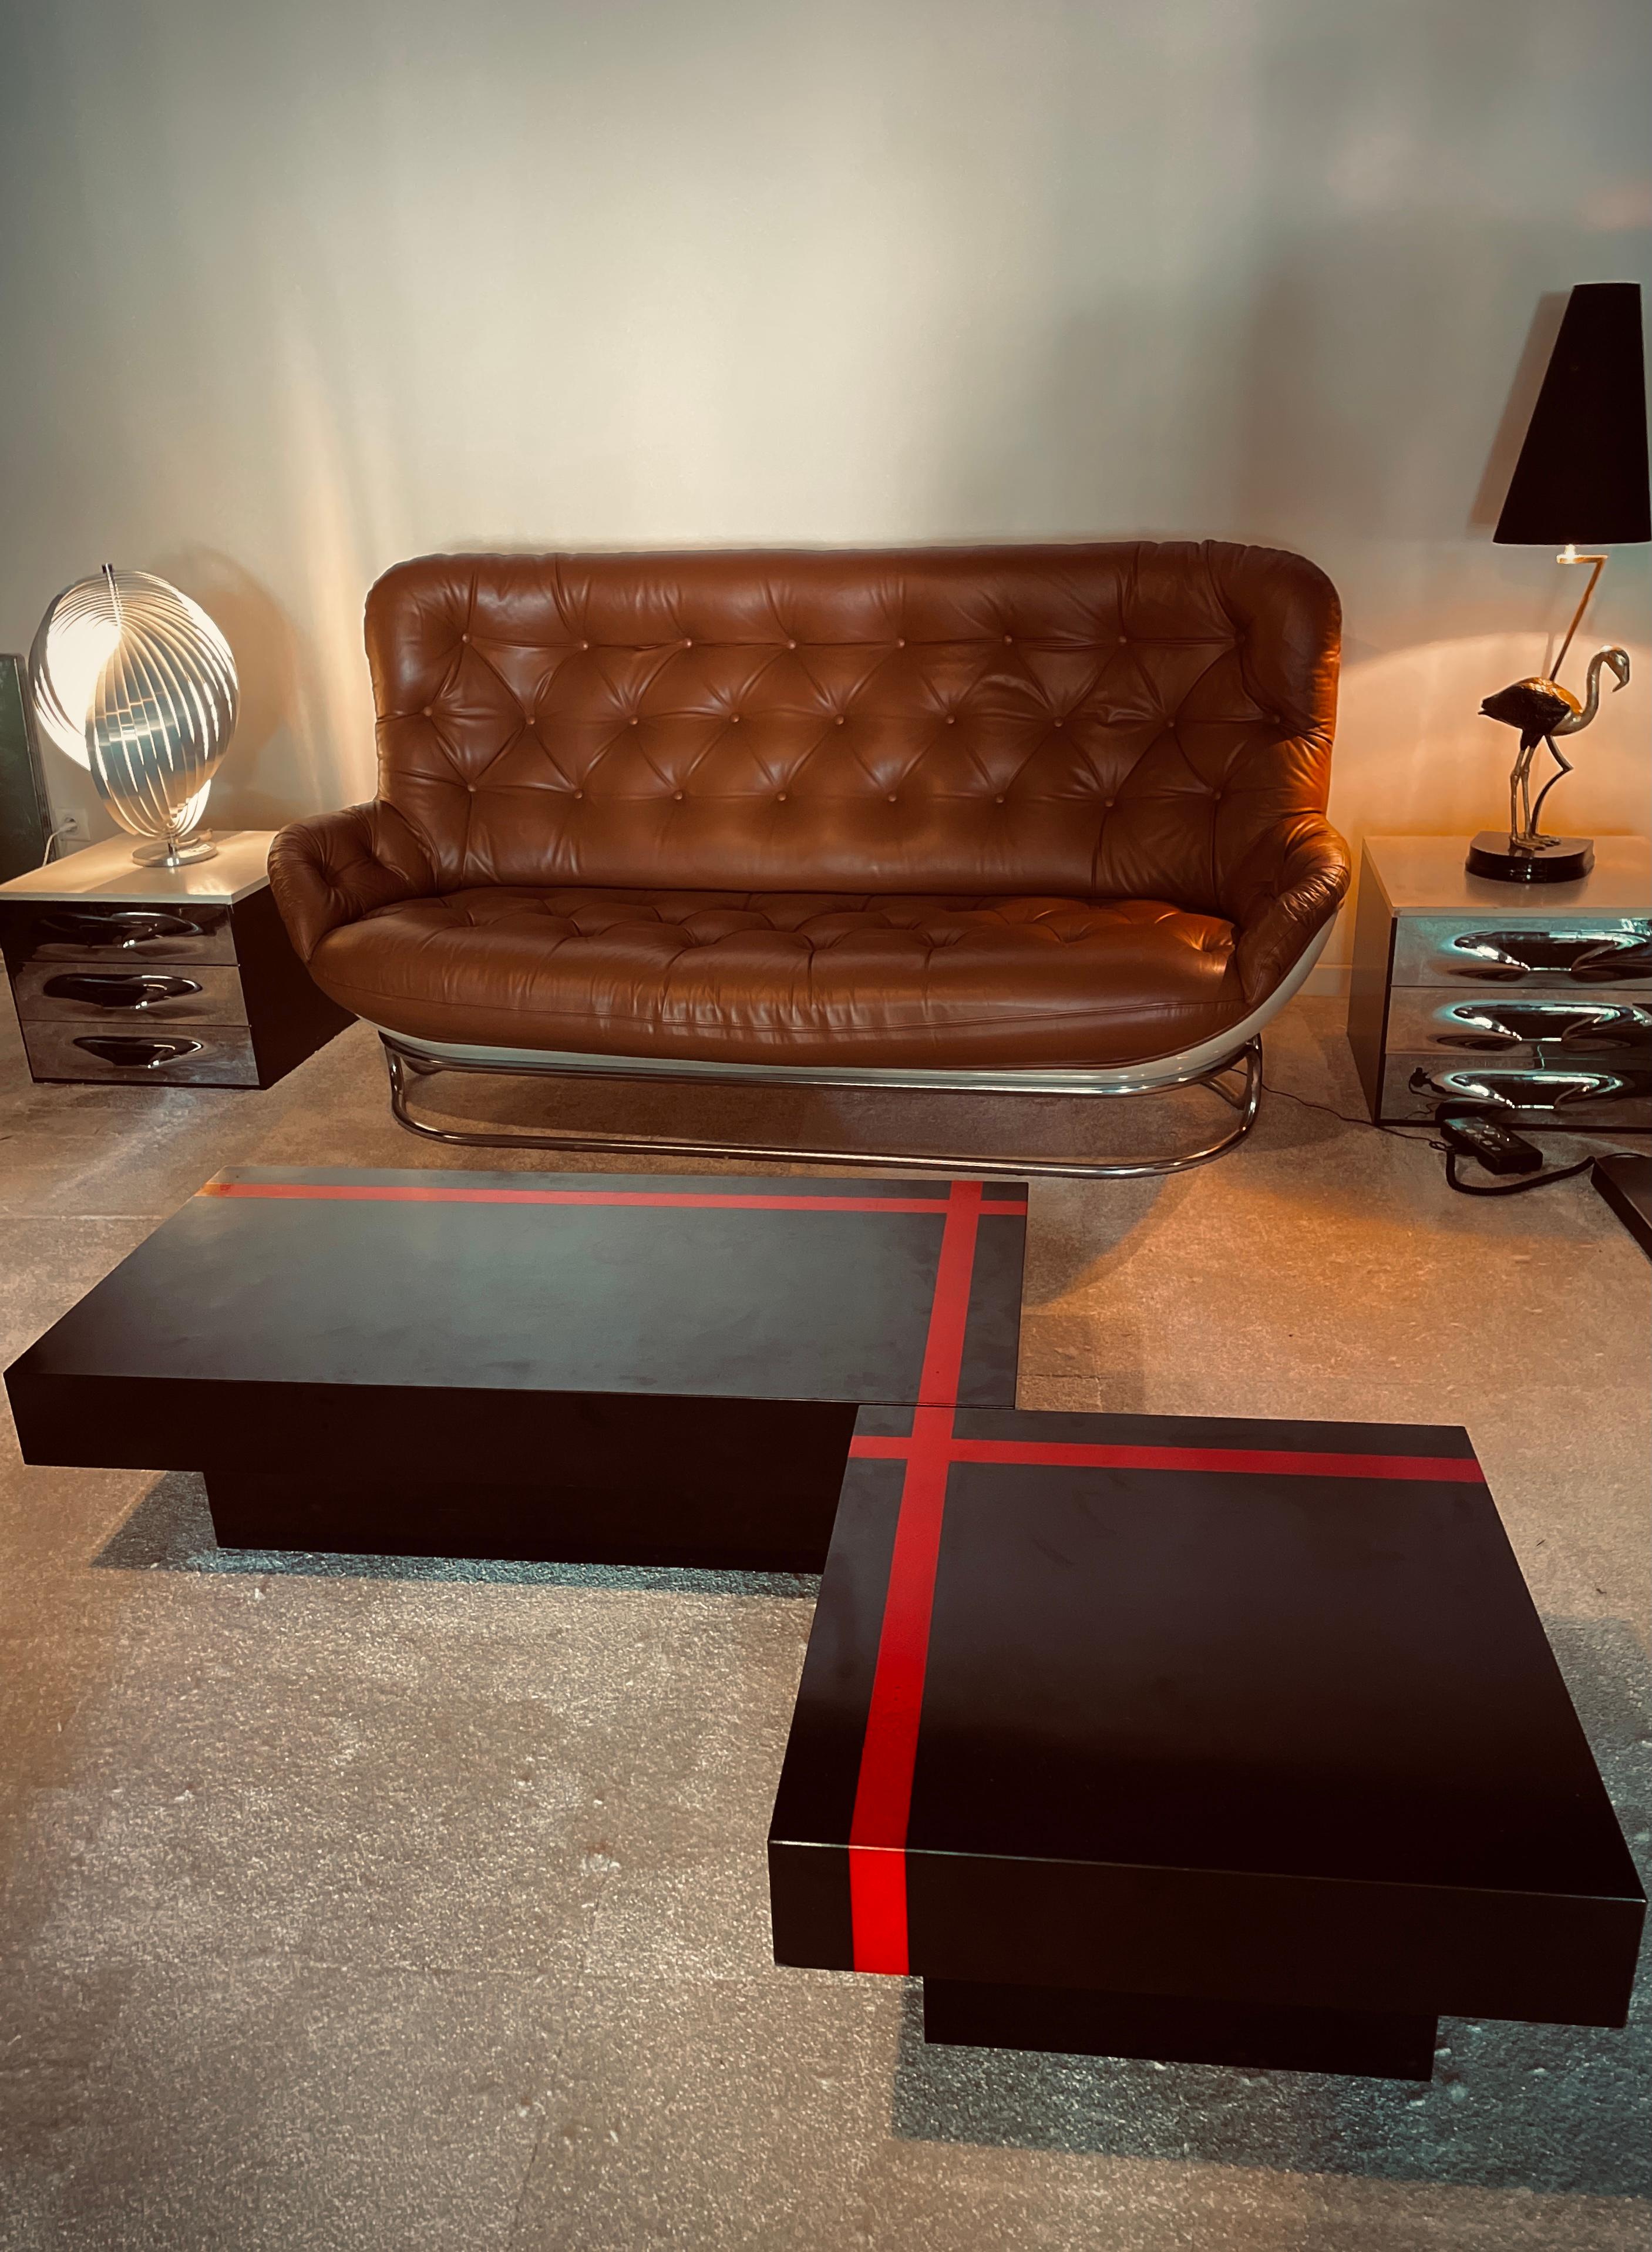 Two modular coffee tables, red and black, France. 1970.
For an interior seventies, space age, pop, mid-century,...
Perfect condition .
Large table: 100 x 55 x 35 cm
Small table 55 x 55 x 35 cm.
In the style of Willy Rizzo, Knoll, Ico Parisi, Romeo